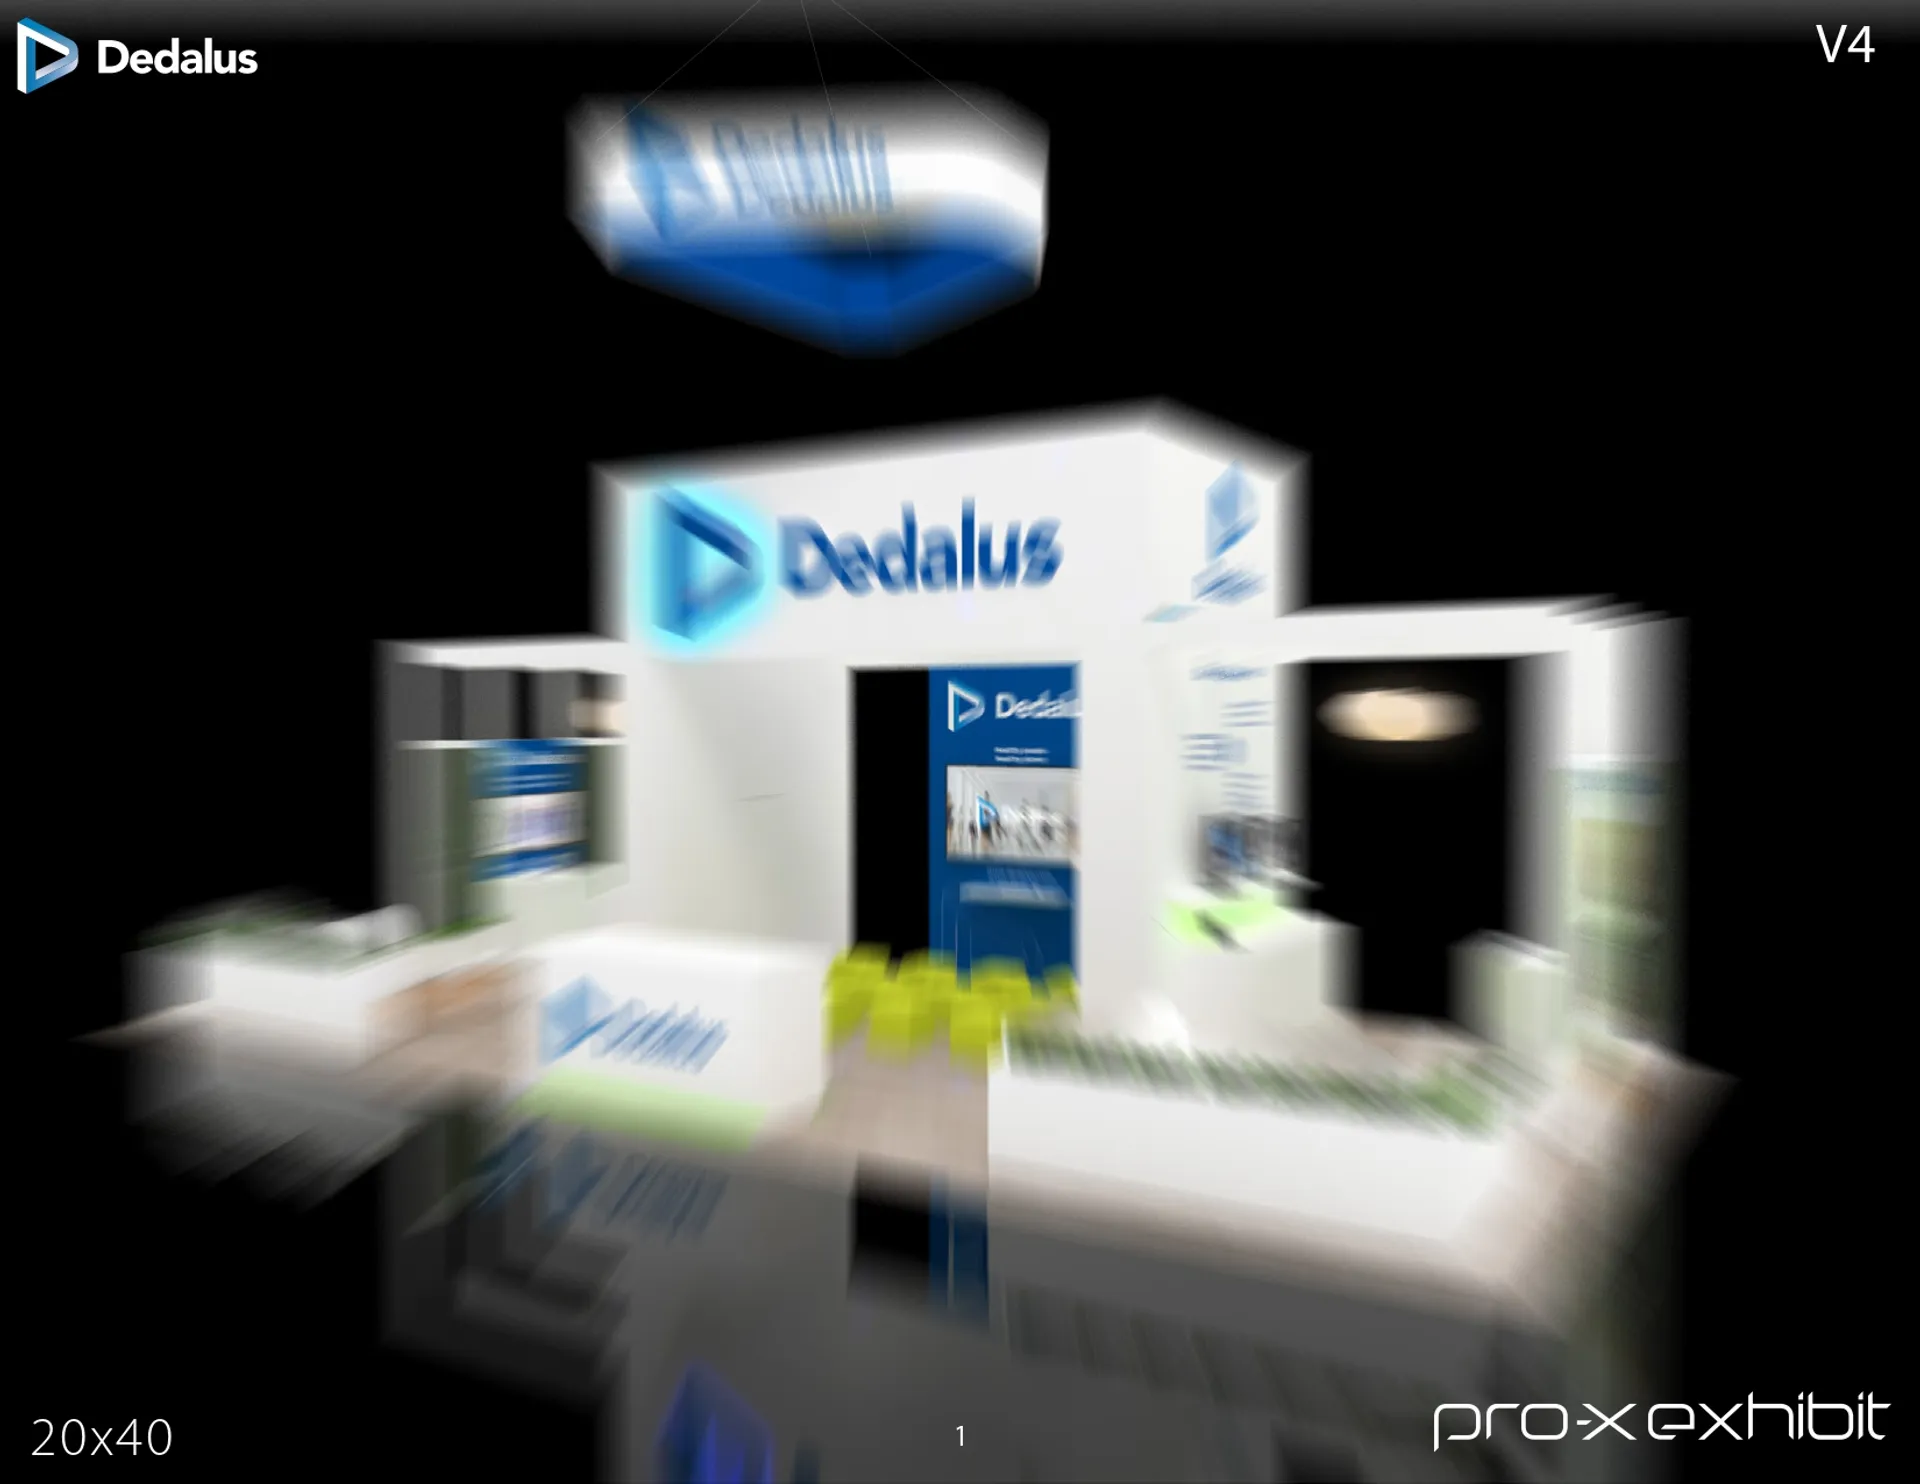 booth-design-projects/Pro-X Exhibits/2024-03-22-20x40-ISLAND-Project-50/DEDALUS_RSNA_20x40_V4-1_page-0001-ycxwq.jpg